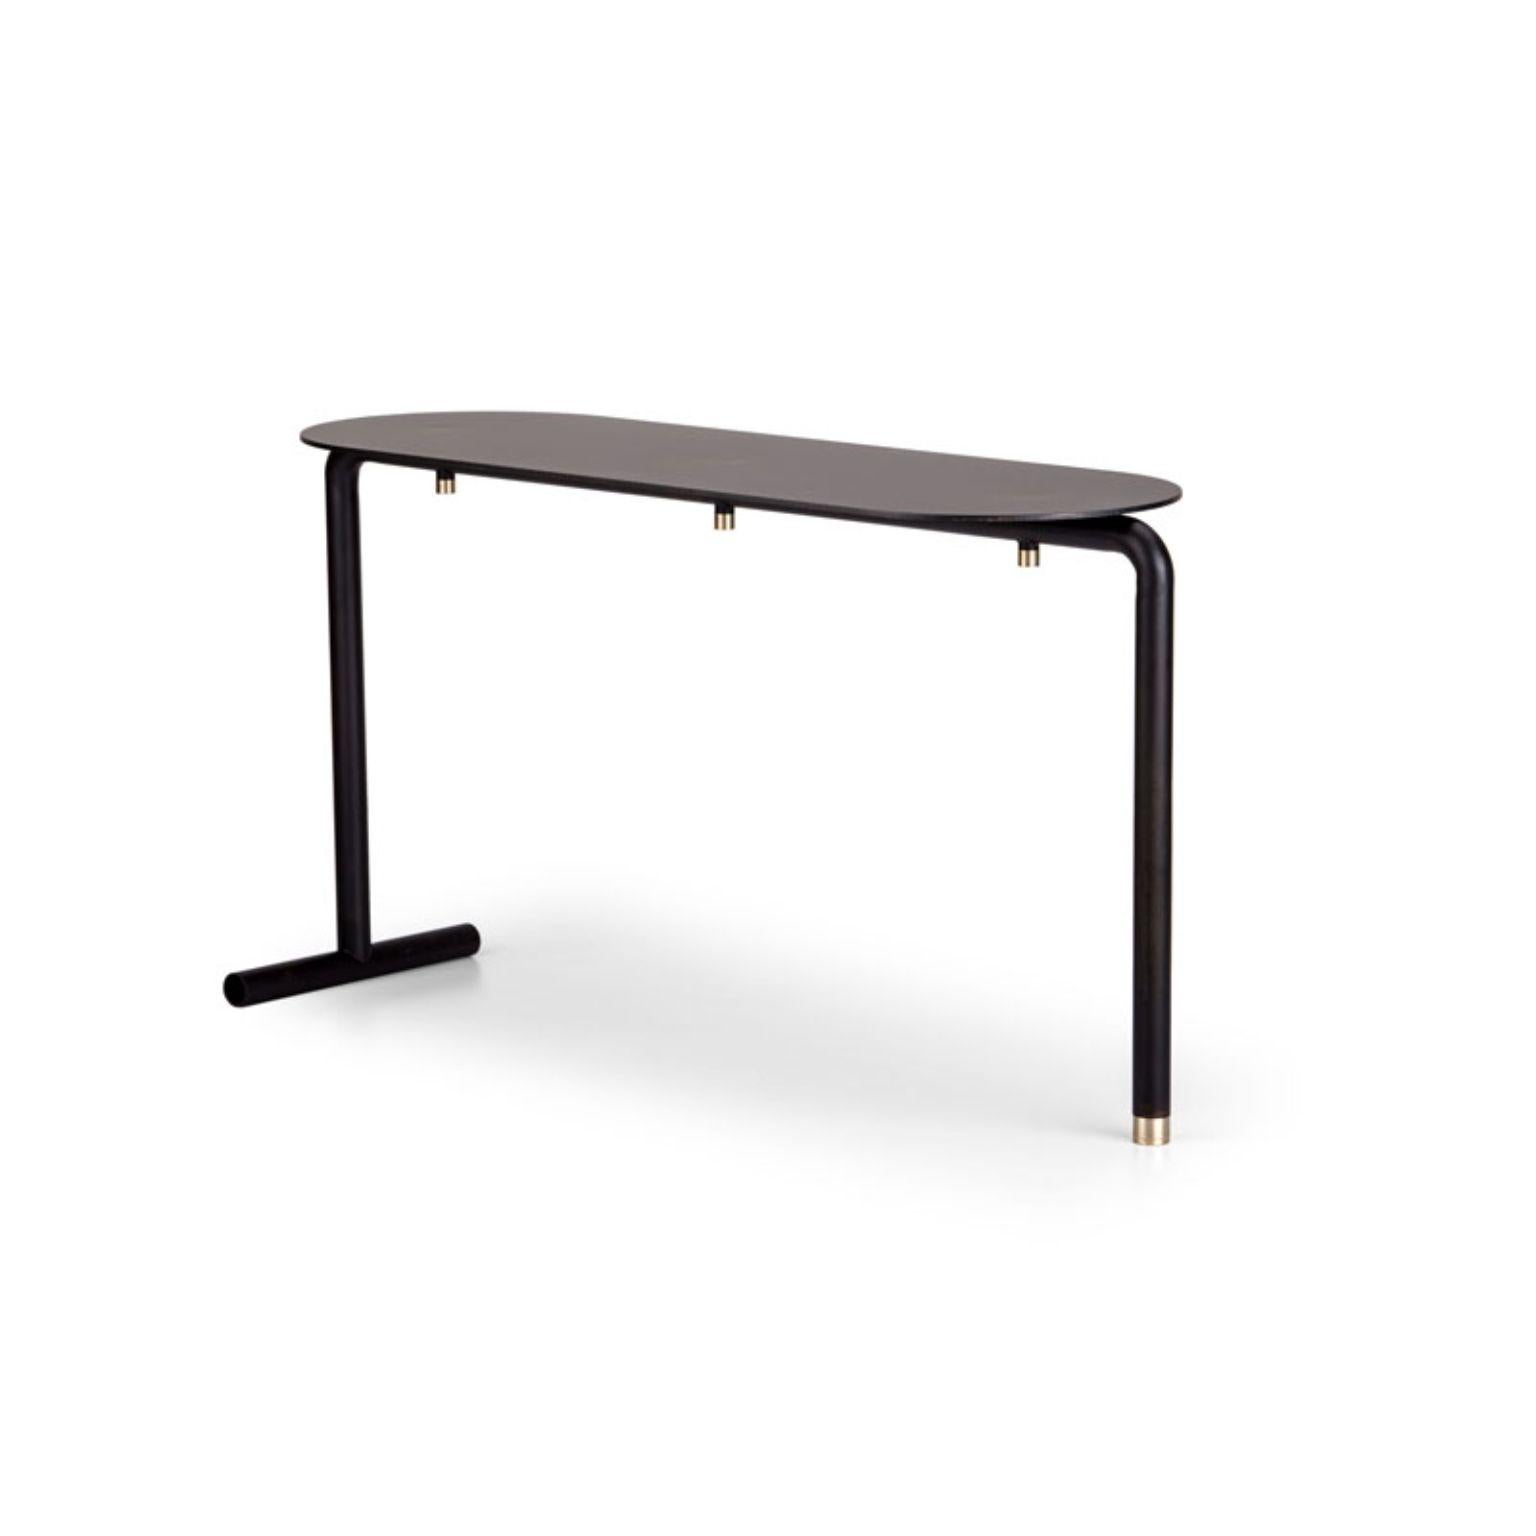 Factory bench by Mingardo
Dimensions: D 86 x W 32 x H 46 cm 
Materials: RAL 9005 black varnished iron structure and satin natural brass details
Weight: 7 kg

Also available in different finishes.

The finesse of the artisan is met with the